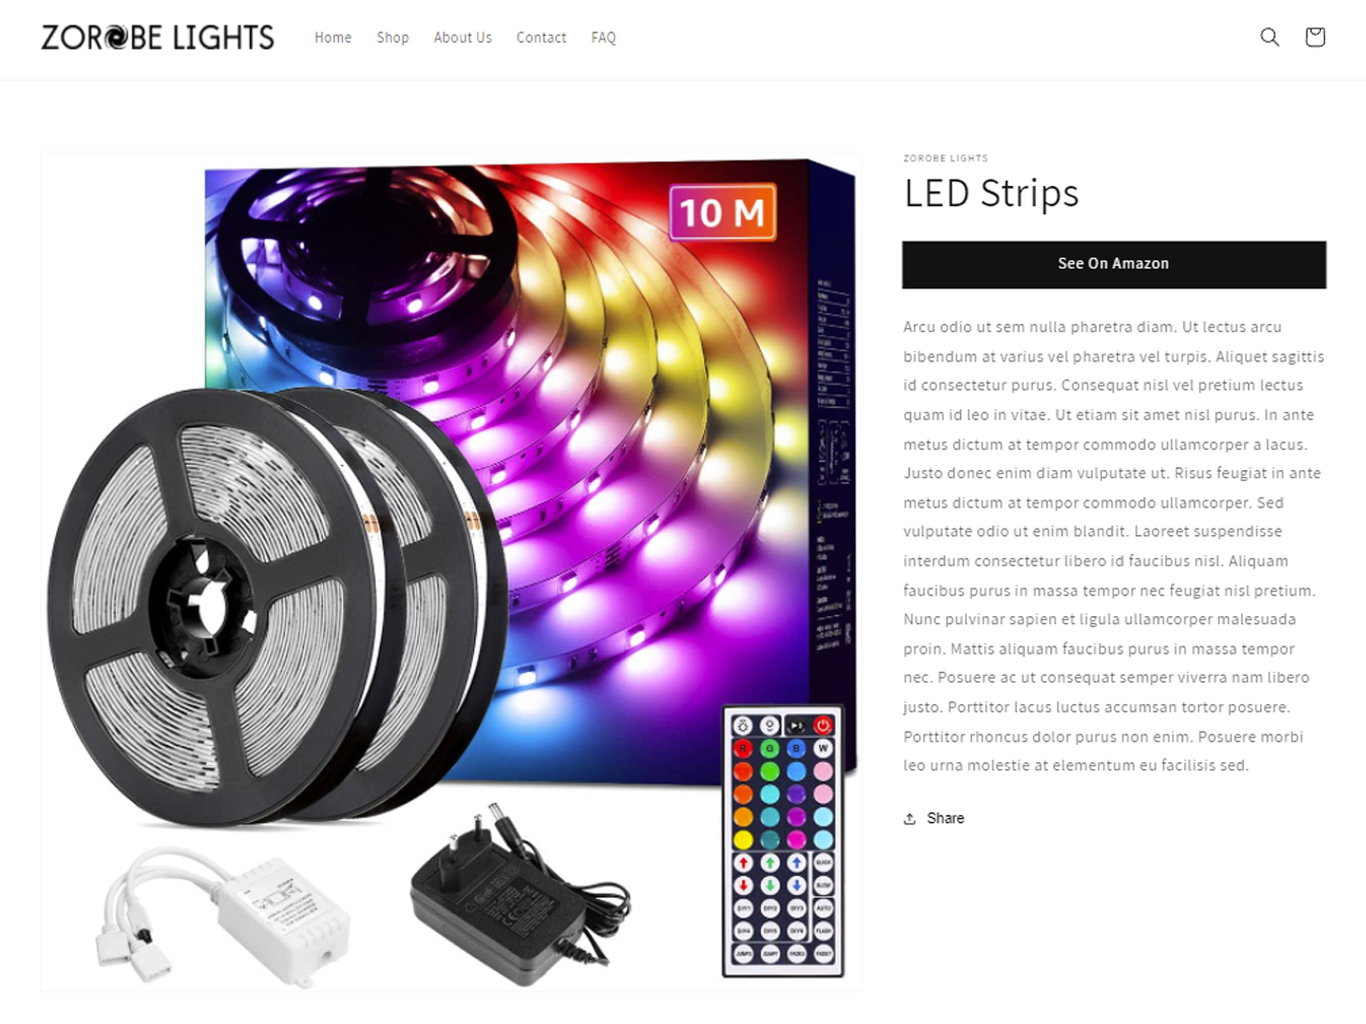 Display of L.E.D. Colored Light Strip affiliate product page on Zorobe Lights Shopify store.